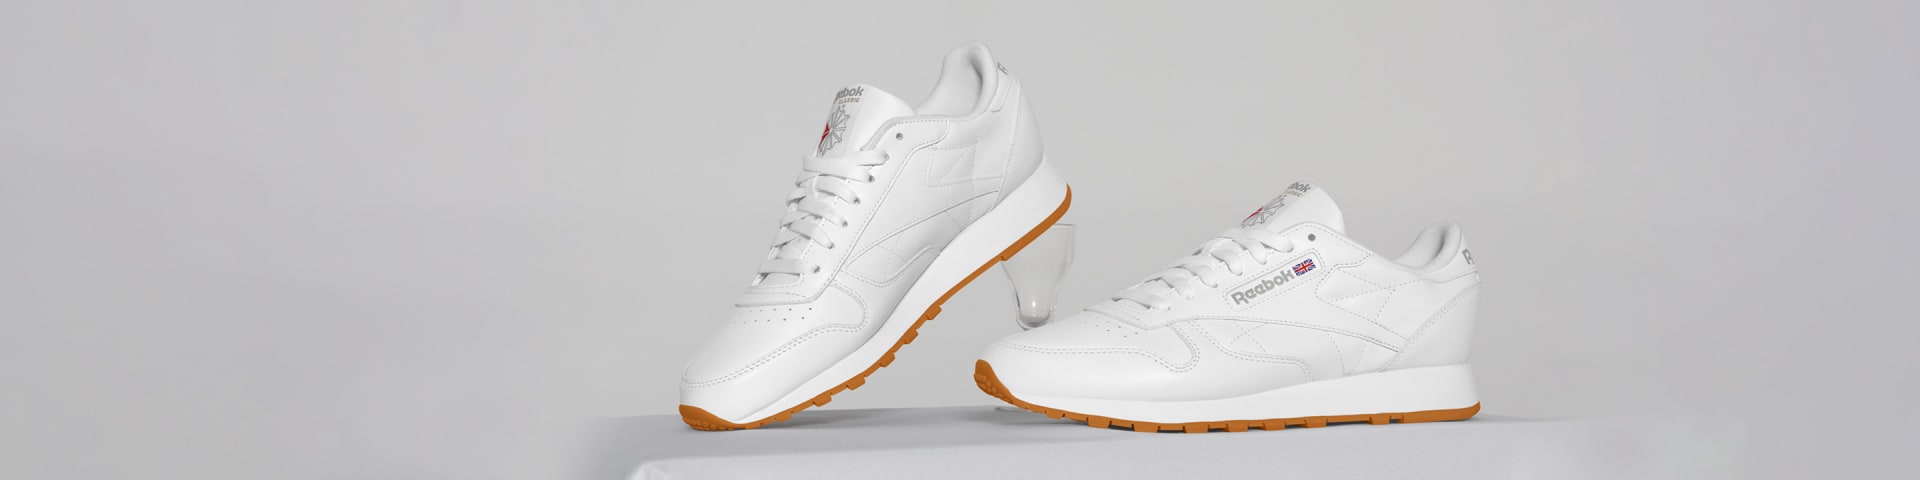 reebok men's classic leather shoes - white